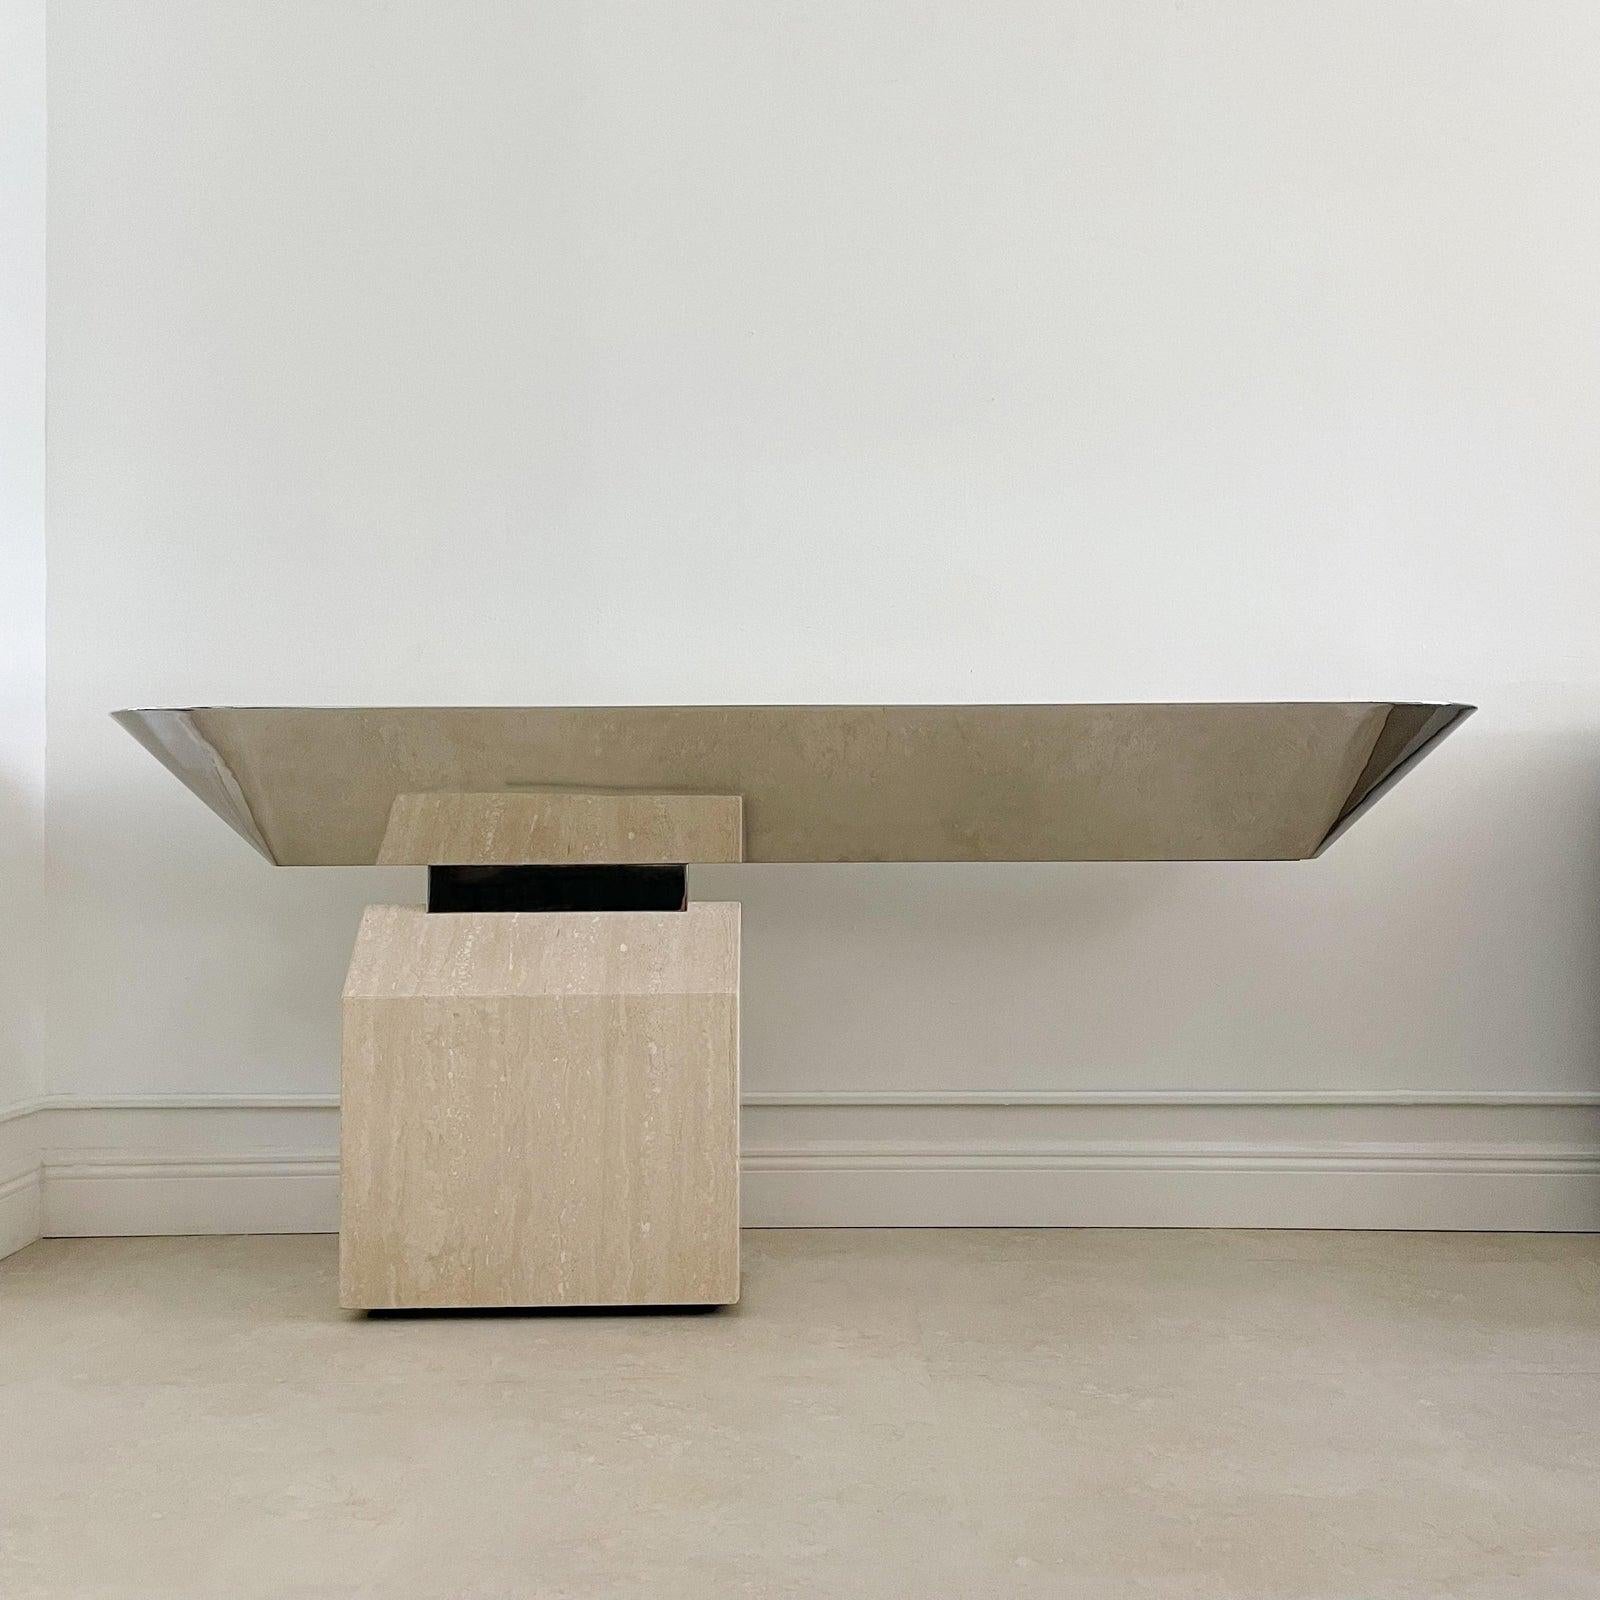 Circa 1970's, the outstanding cantilevered design of the Offbeam illuminated console adds drama to any space. The polished stainless steel trough and polished stainless steel connector are supported by the precisely fabricated gabled travertine